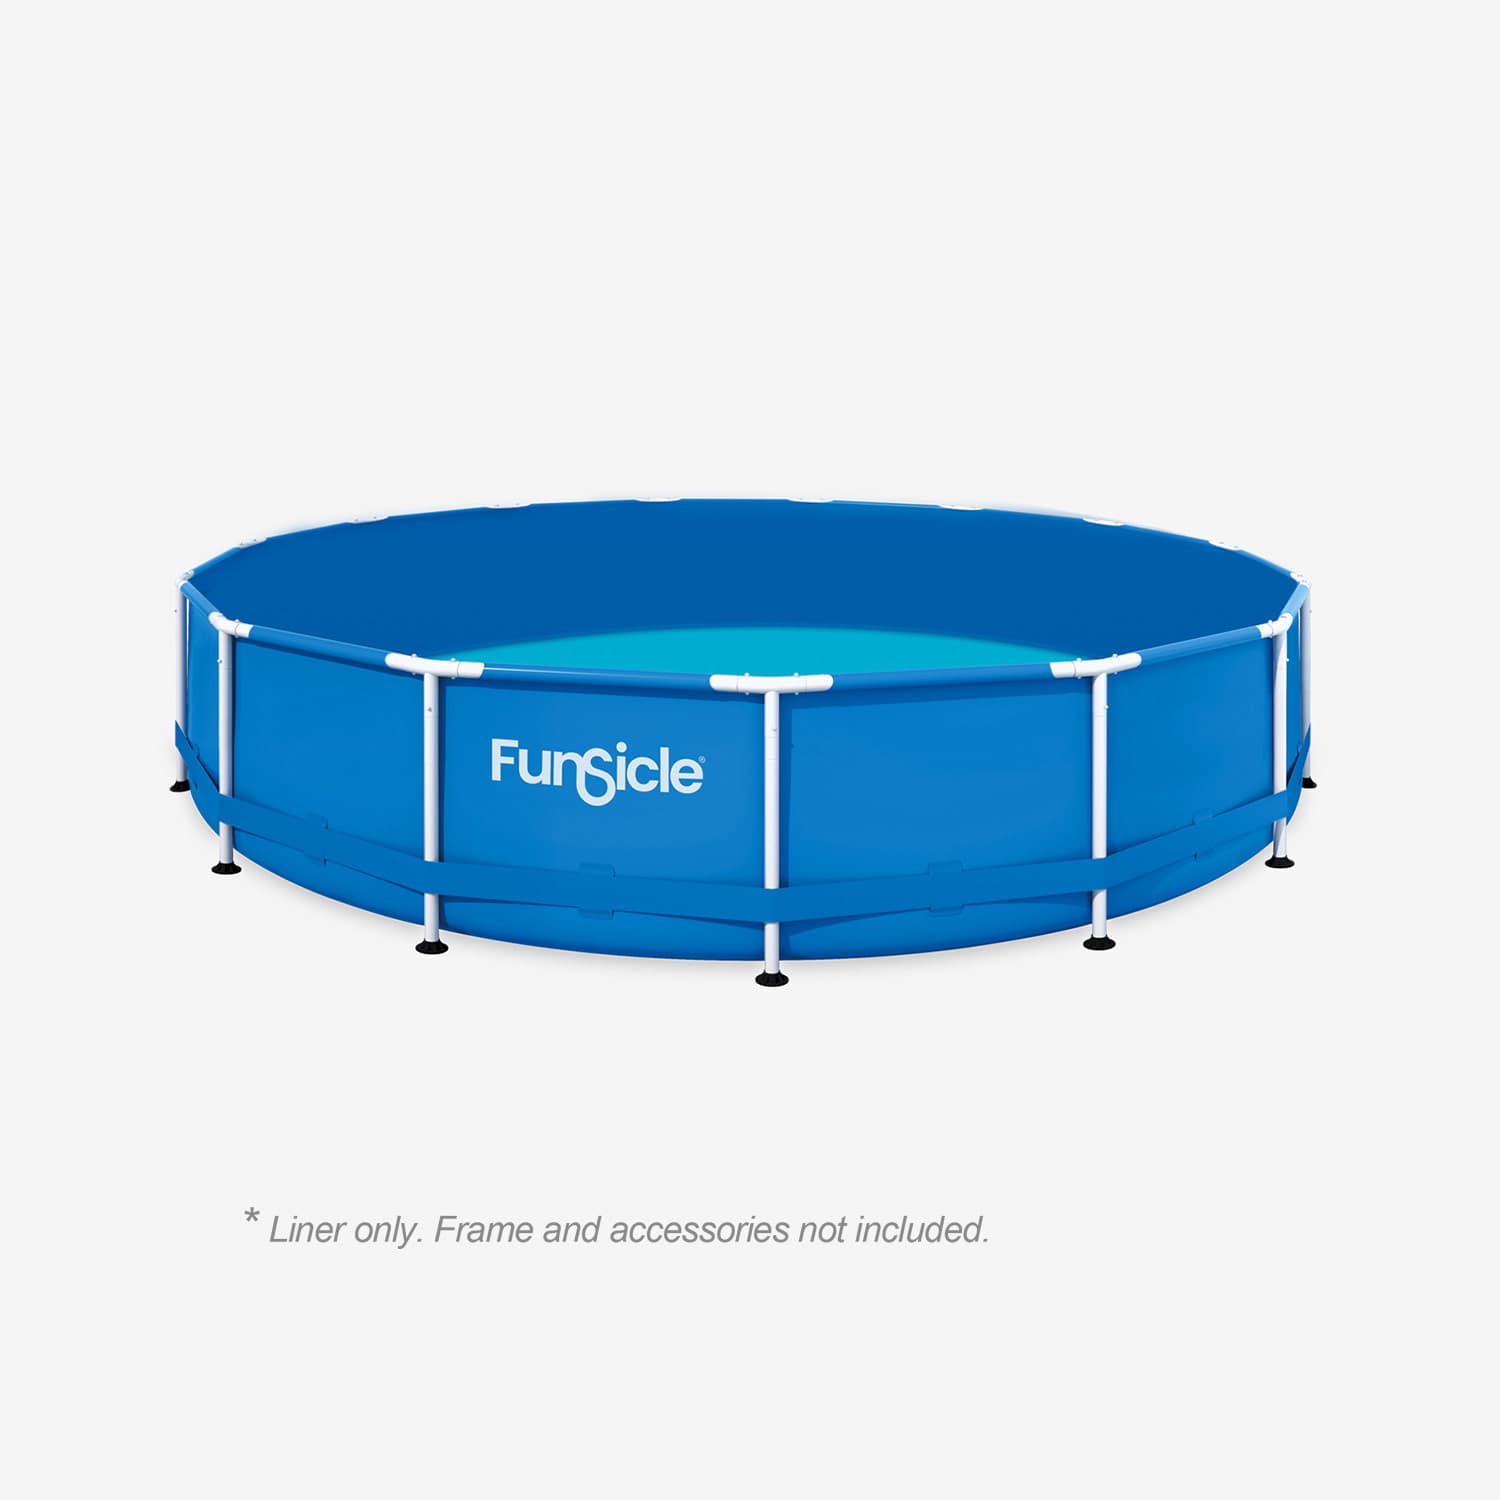 Funsicle 14 ft Activity Pool Liner